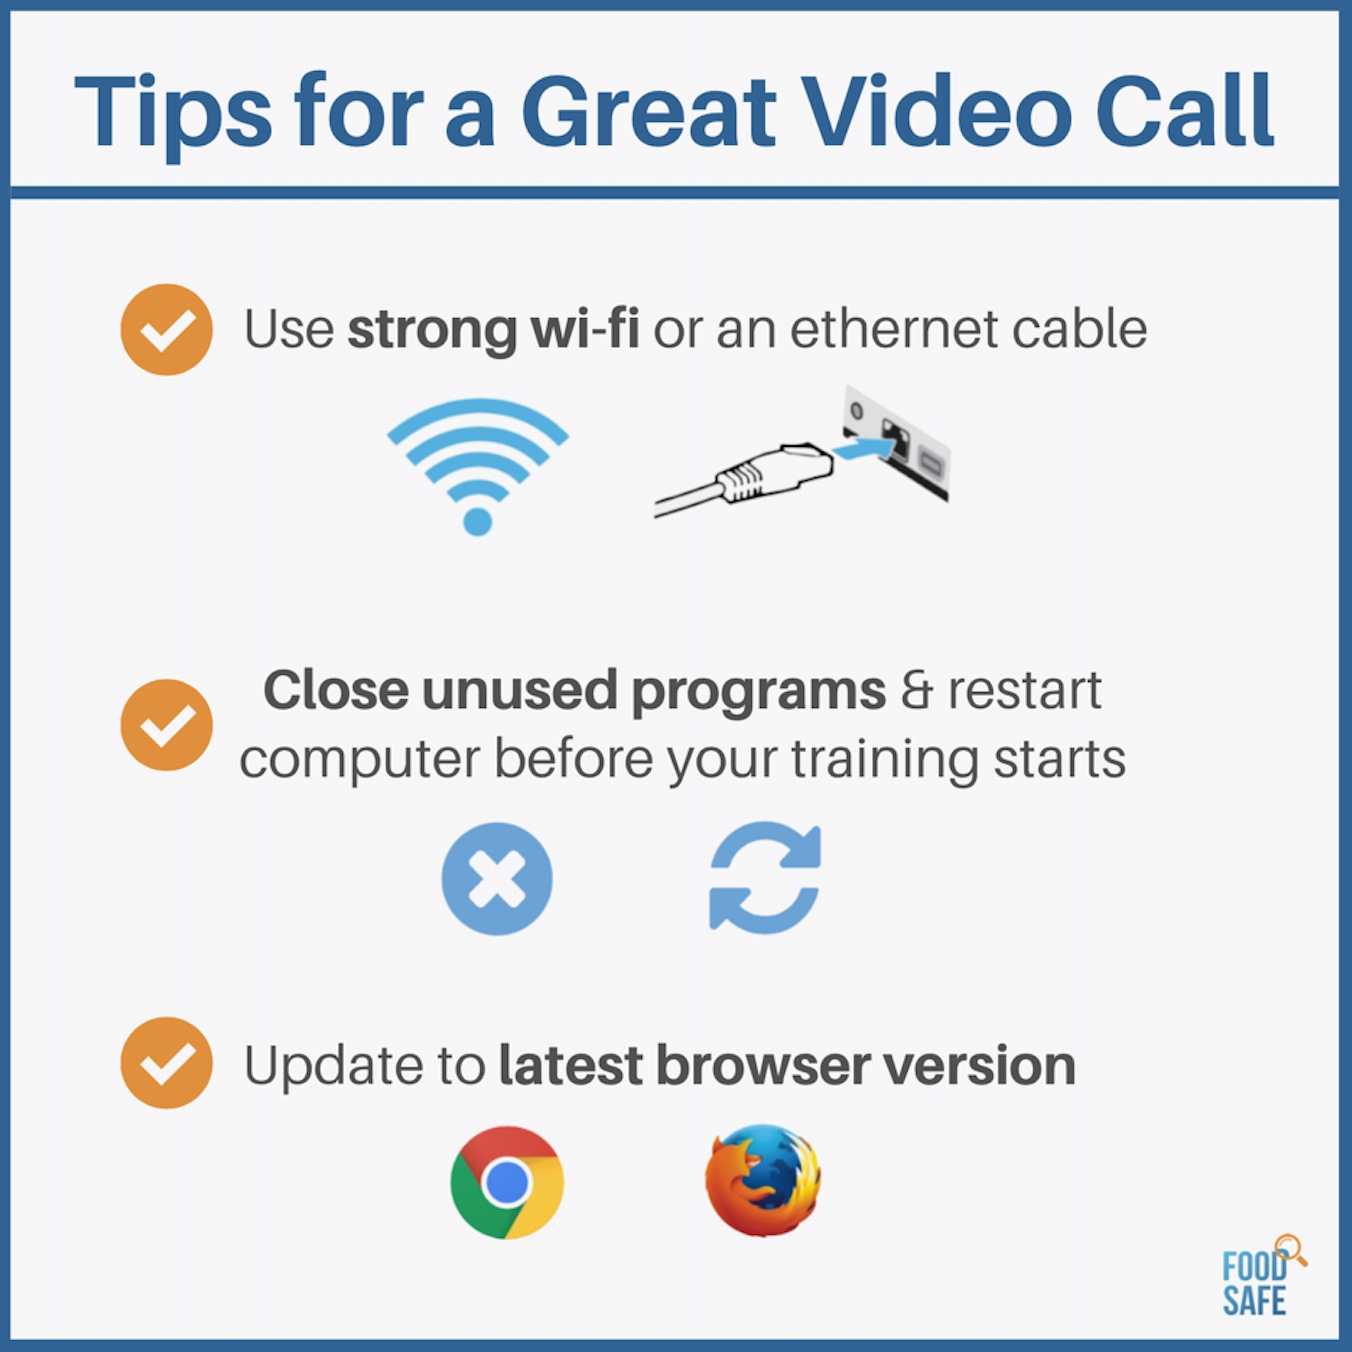 Tips for a Great Video Call